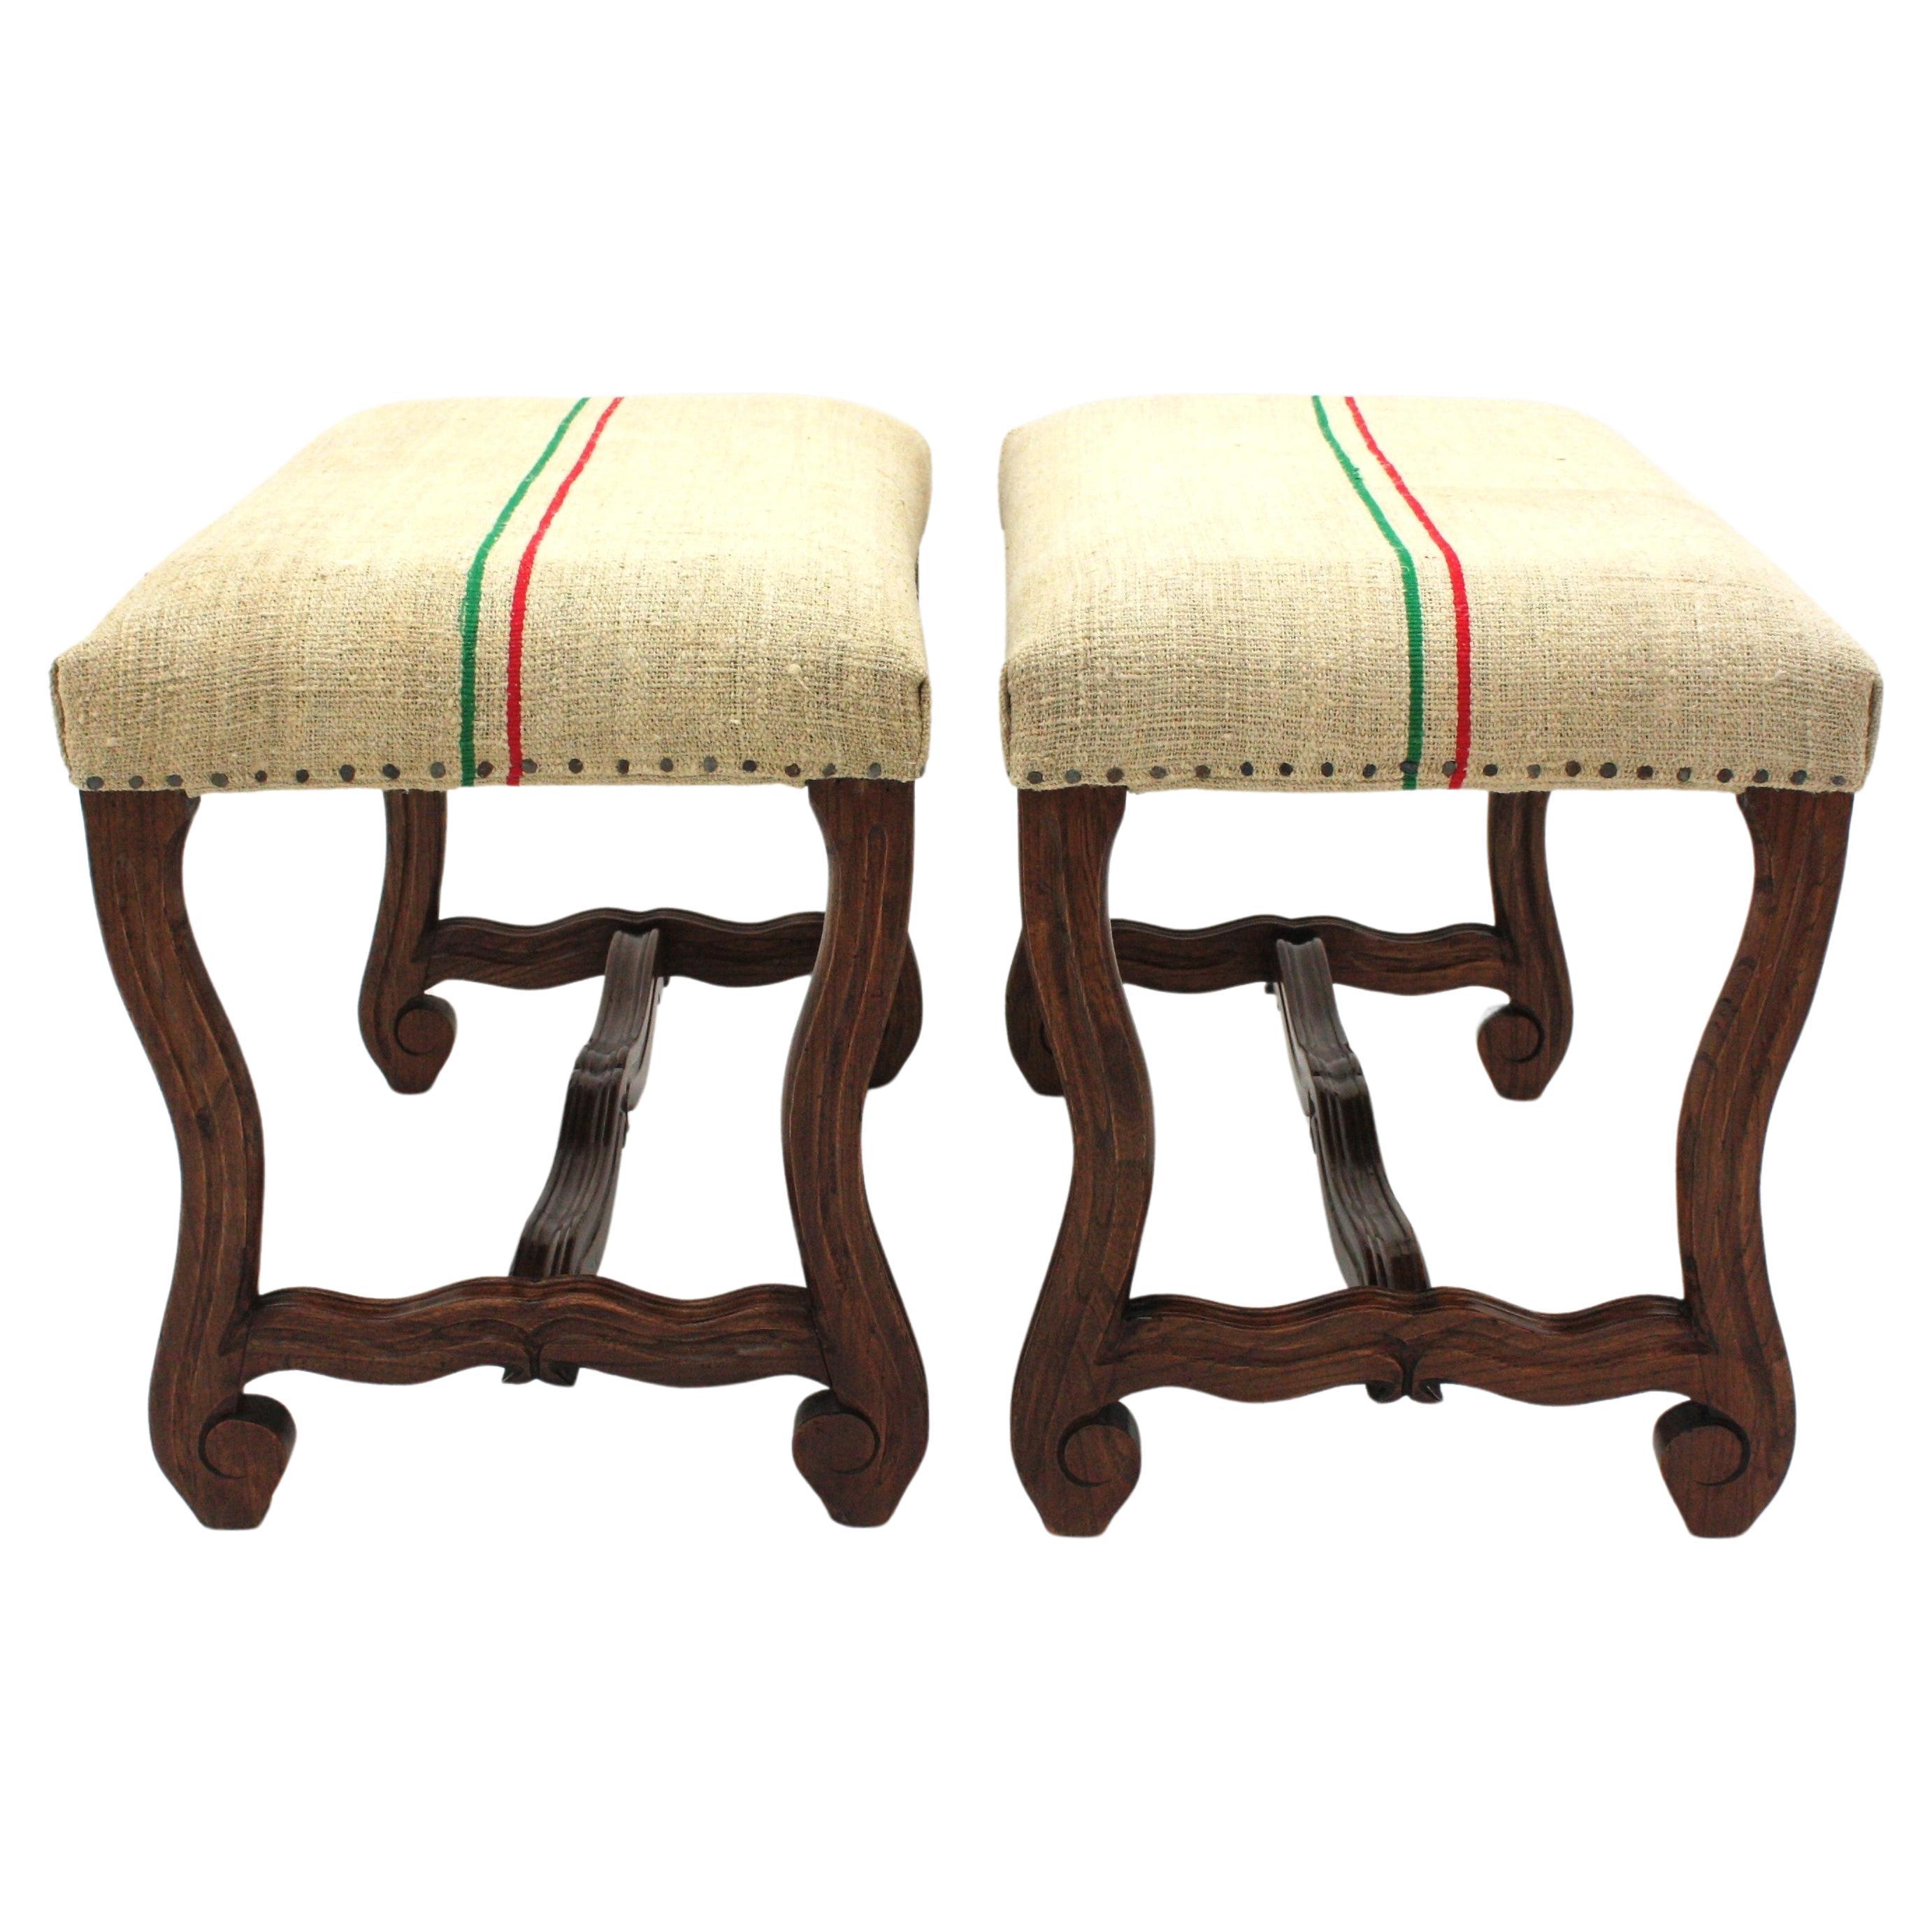 Pair of Os de Mouton Louis XIV Oak Stools New Upholstered in French Linen 